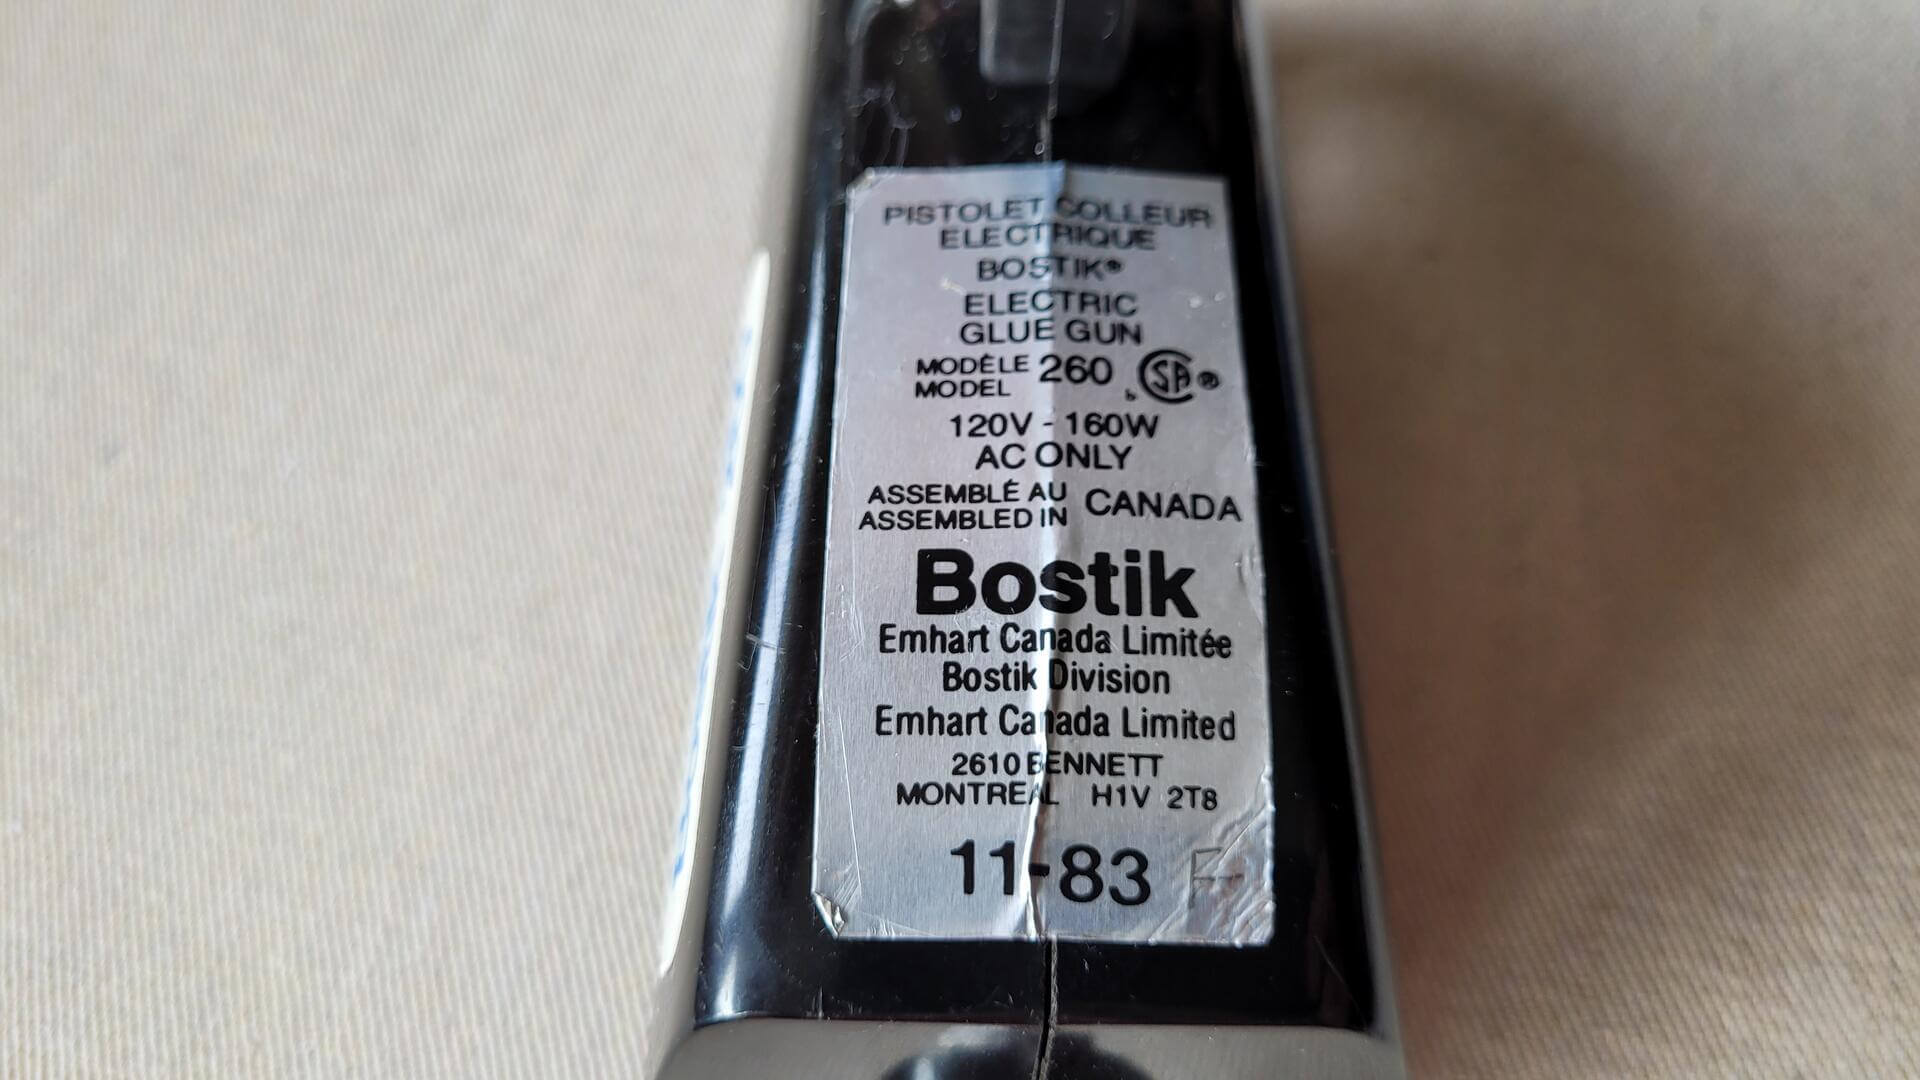 Vintage Bostik 260 thermogrip industrial electric hot glue gun by Emhart Canada Ltd. Heavy duty collectible craft tools and hot glue dispenser